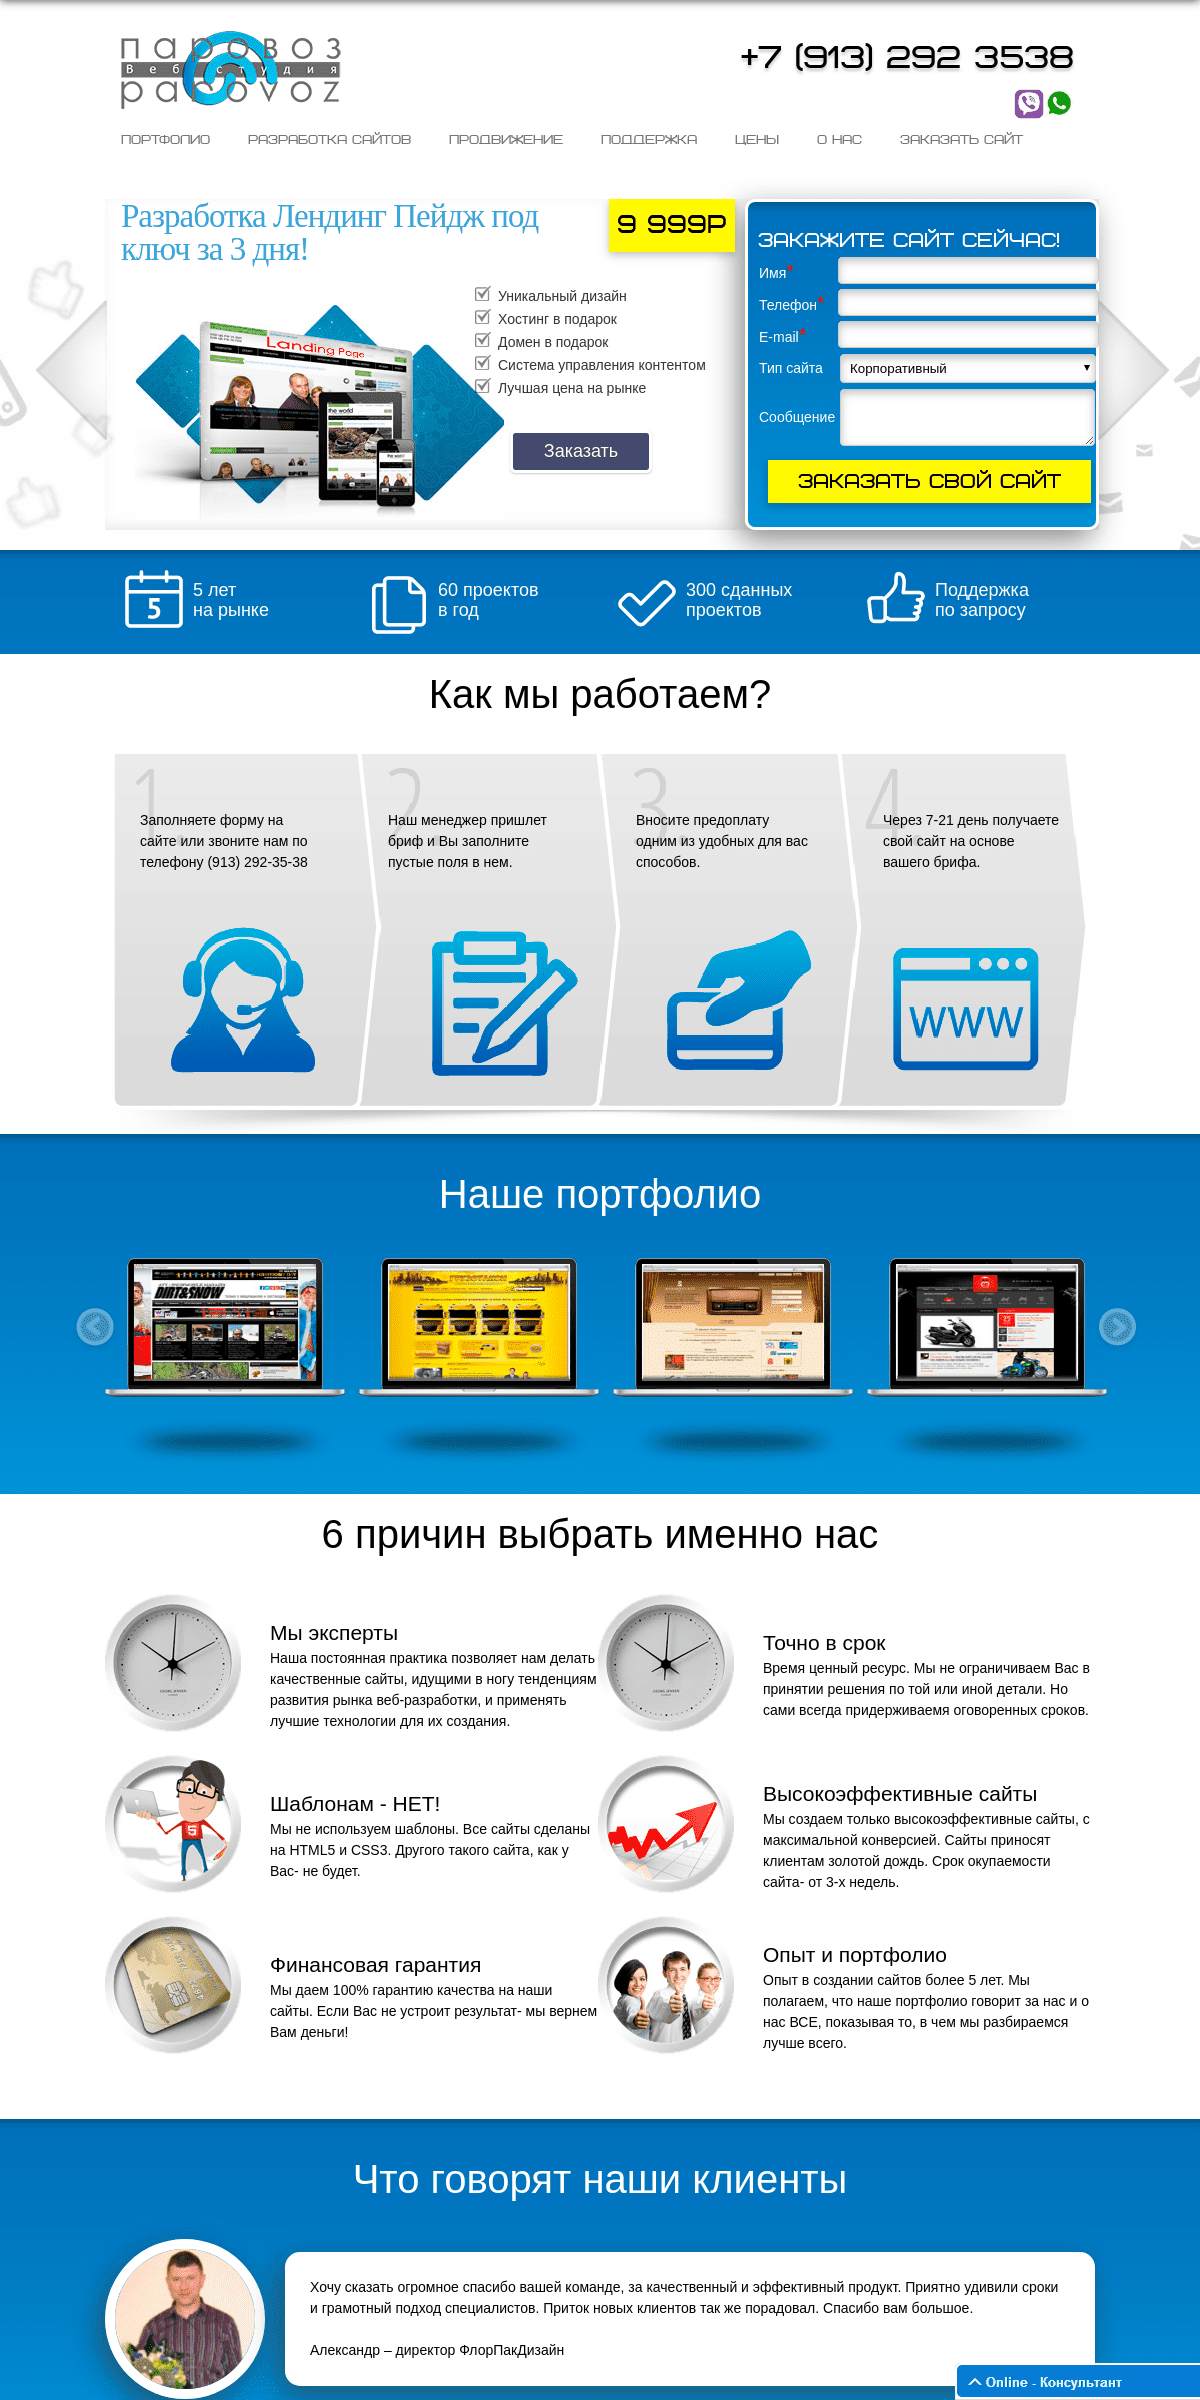 A complete backup of iparovoz.ru